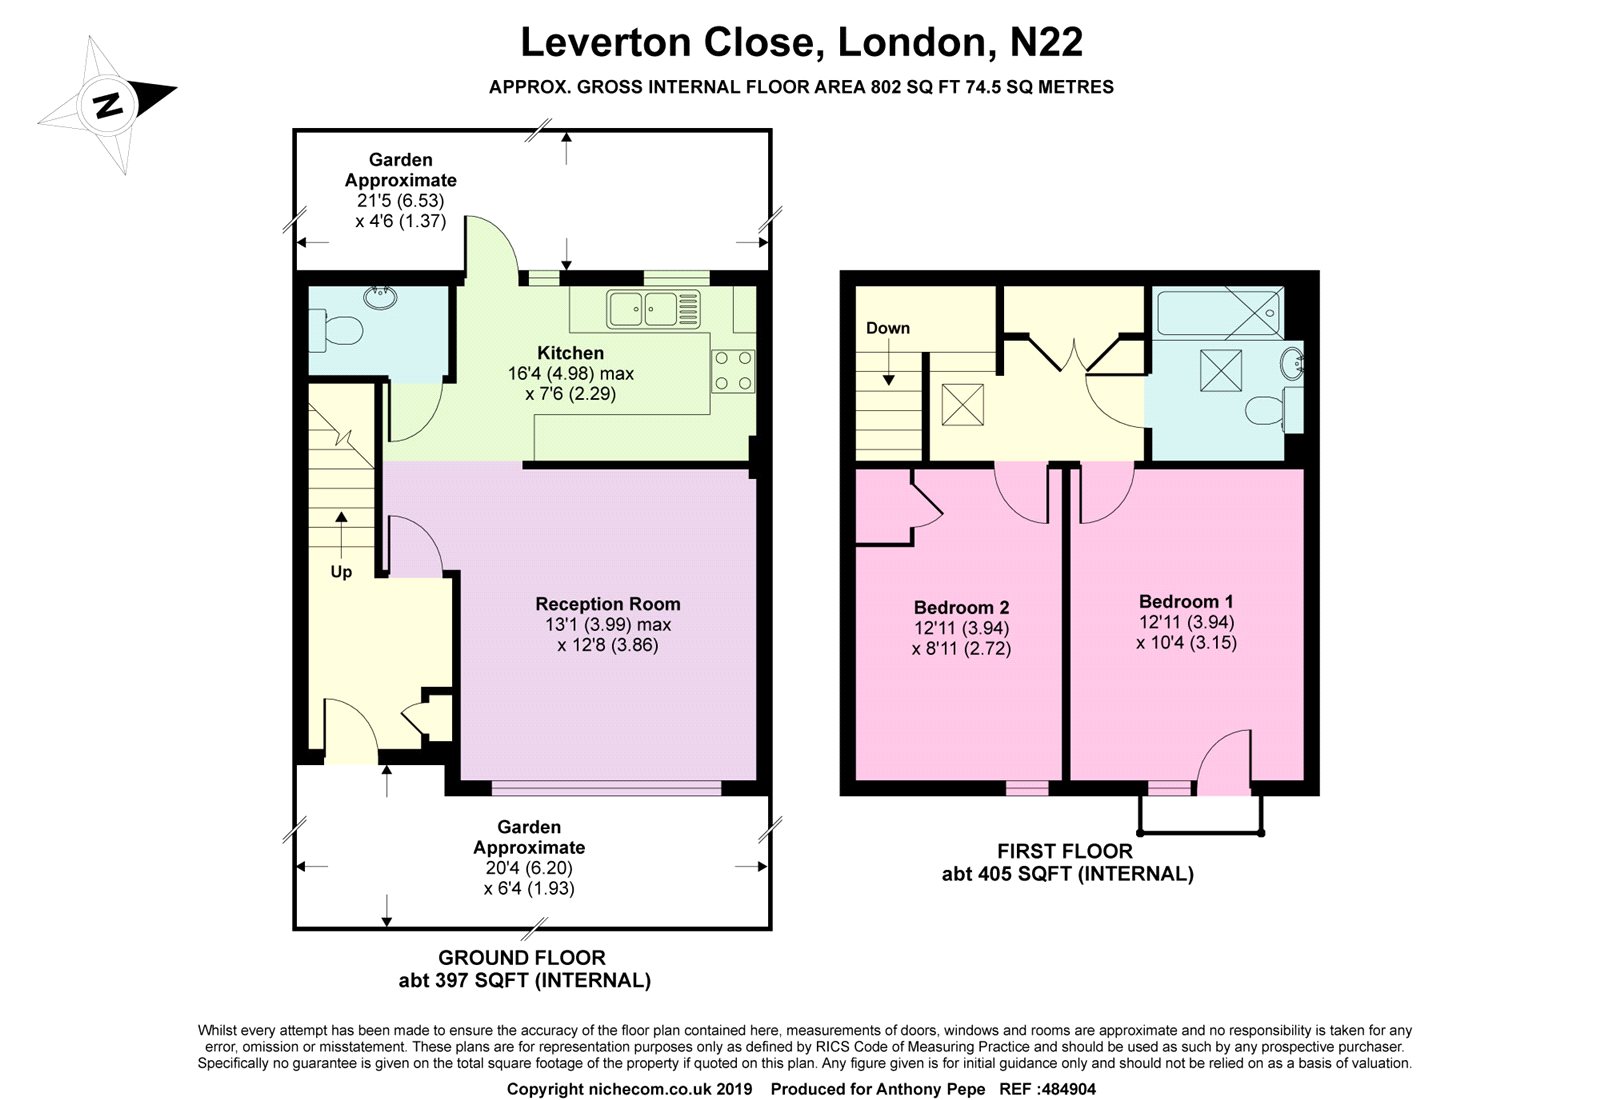 2 Bedrooms Detached house for sale in Leverton Close, London N22